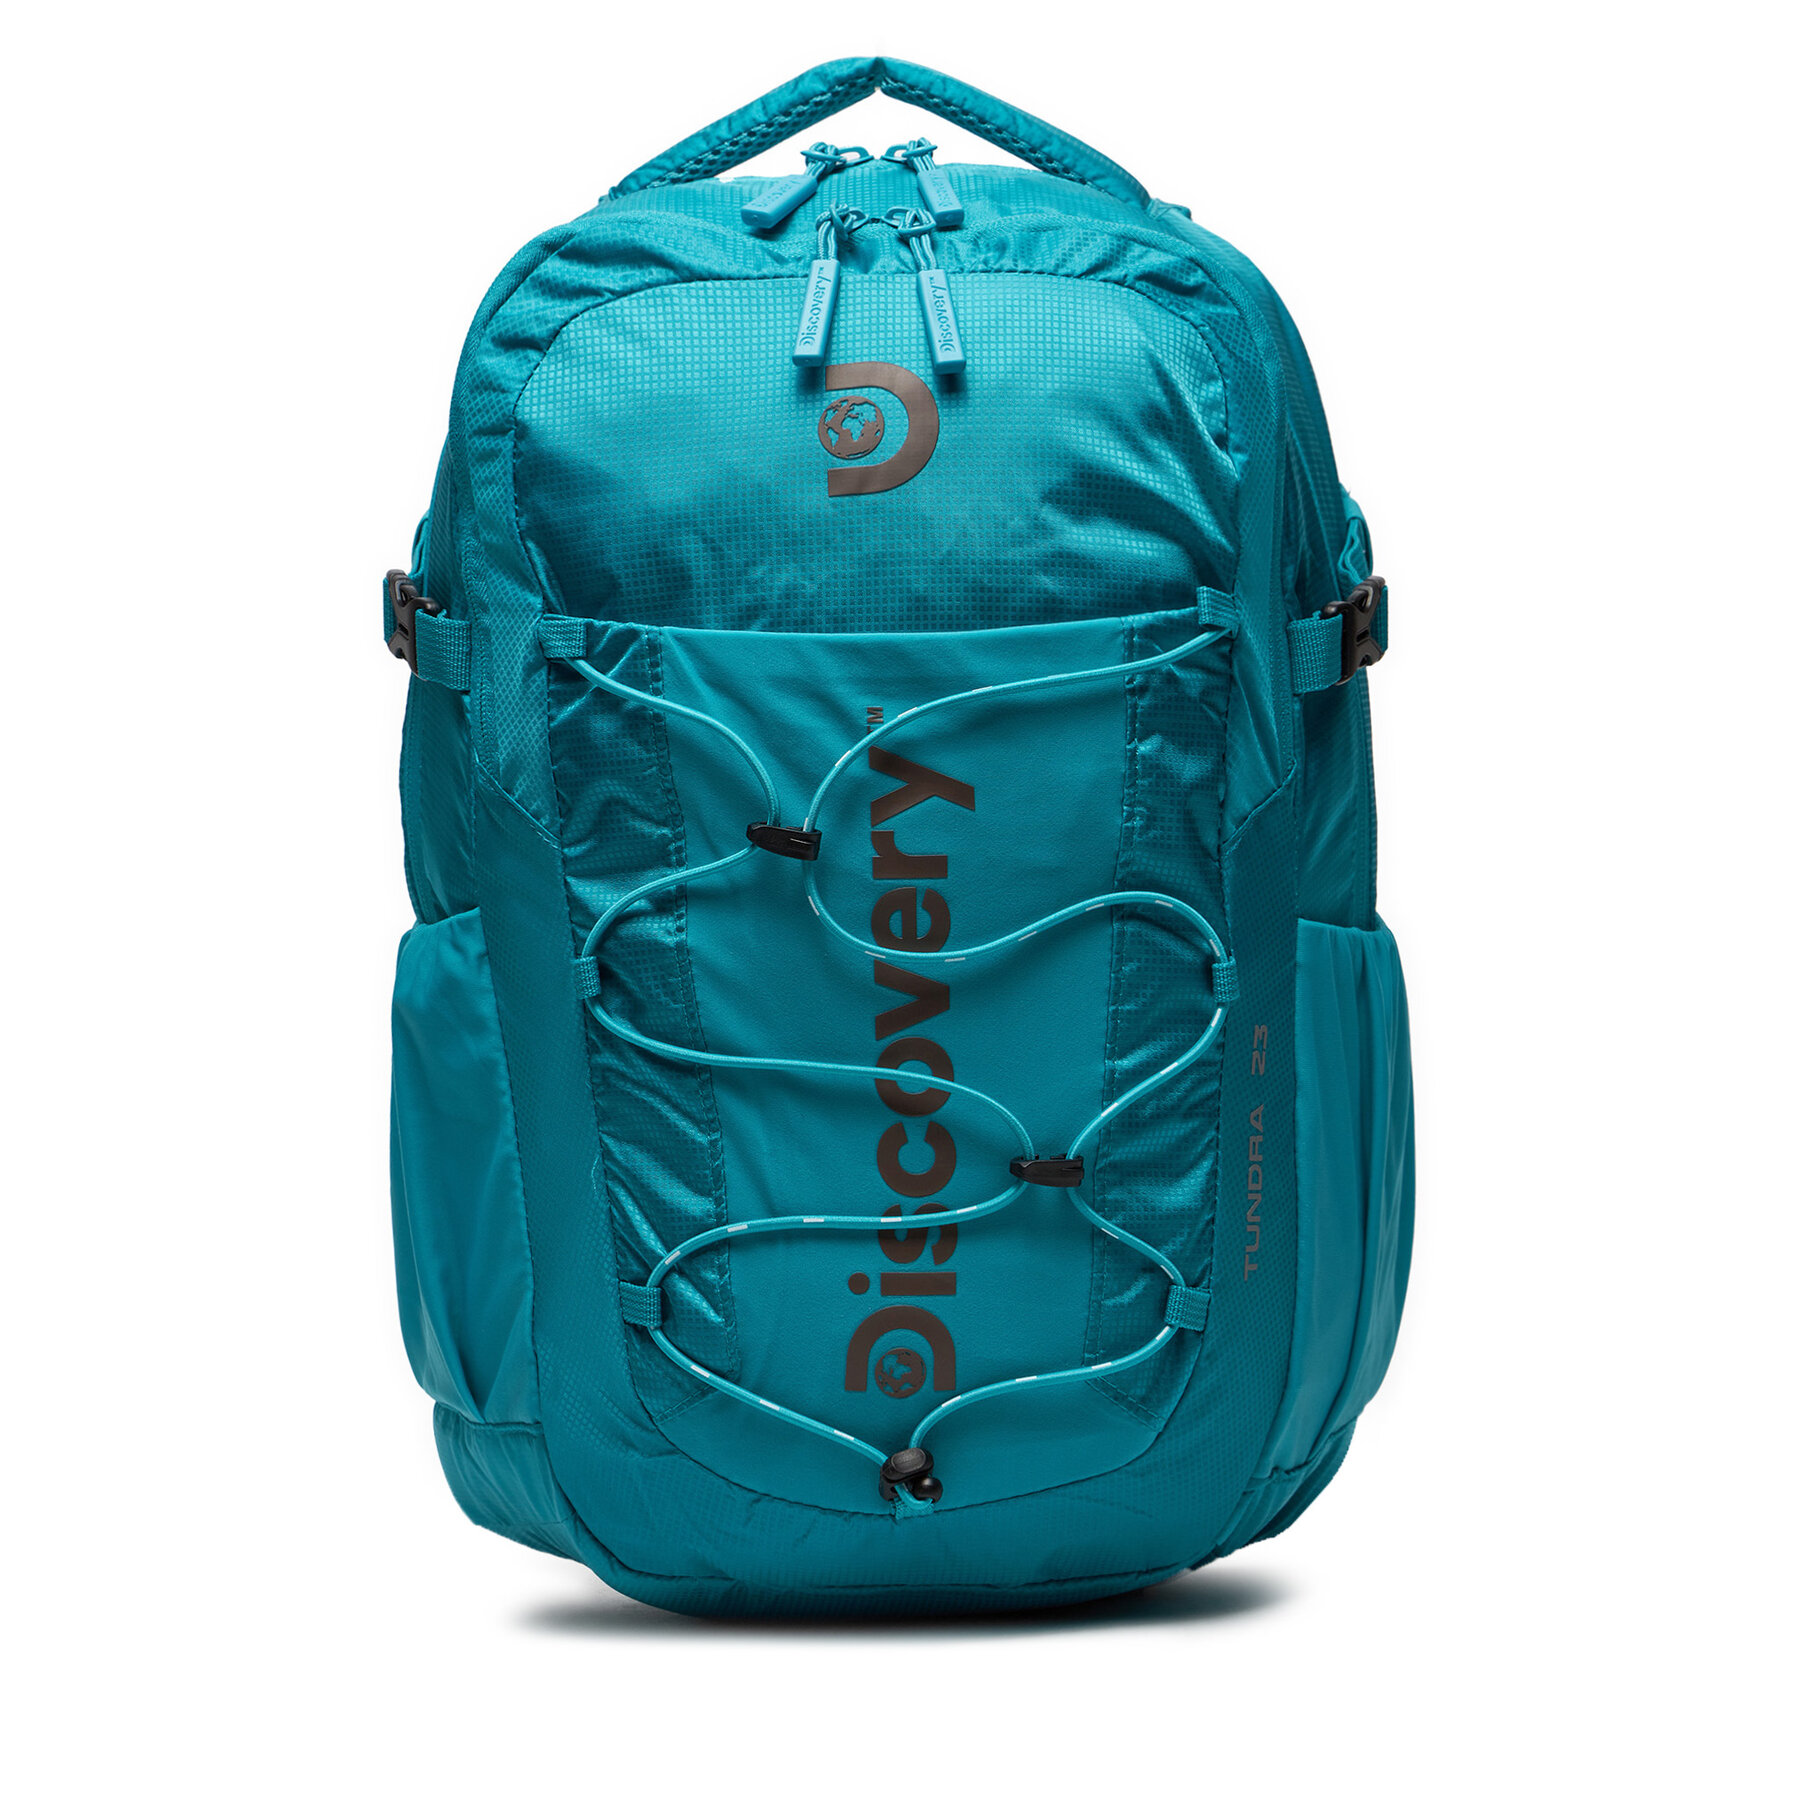 Rucksack Discovery Tundra23 Backpack D00612.39 Türkisfarben von Discovery